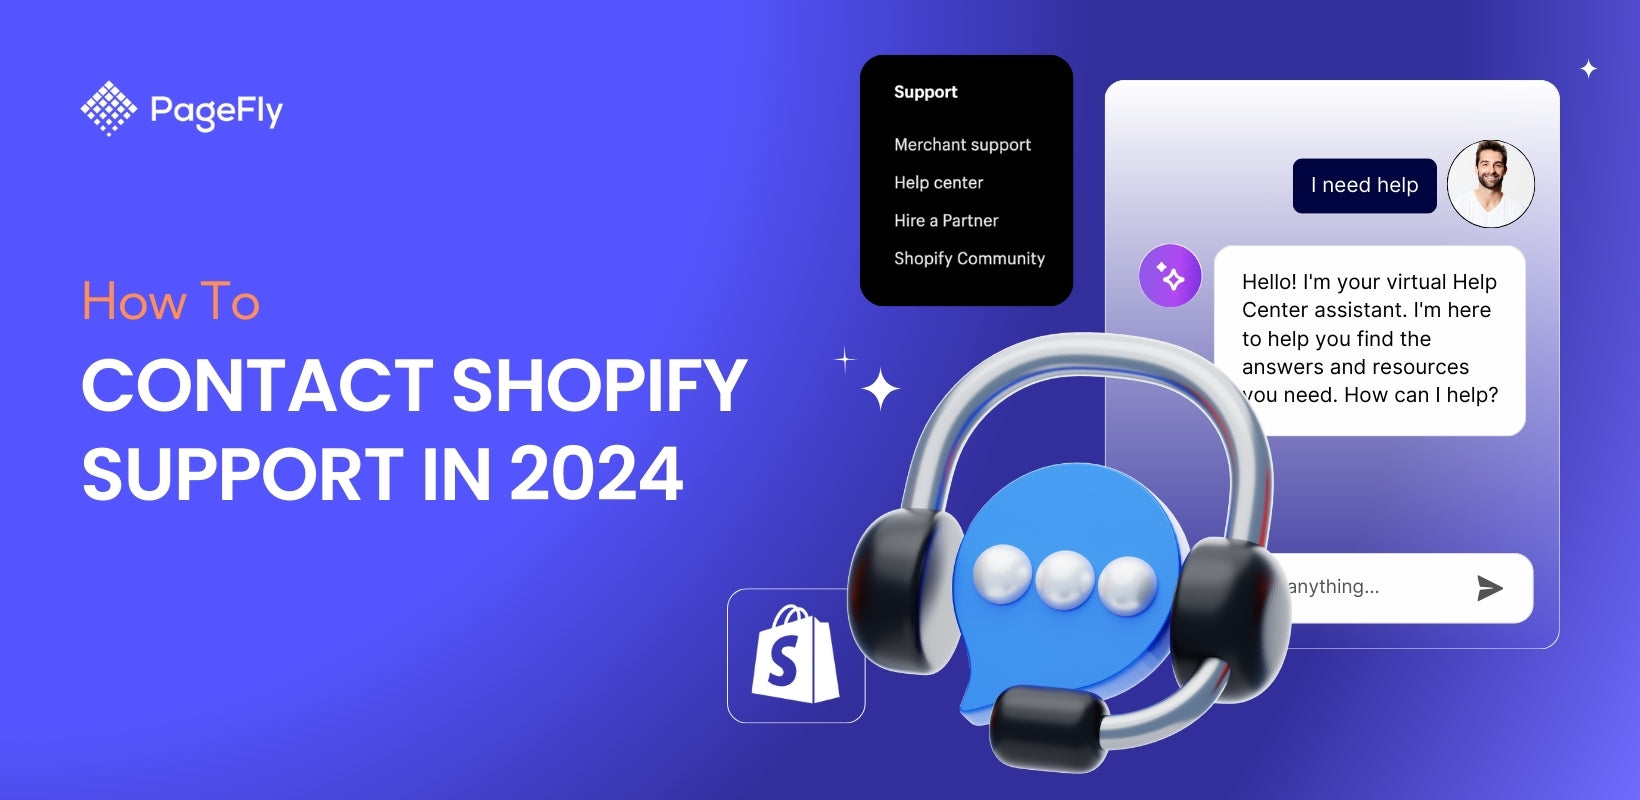 How to Contact Shopify Support - 5 Ways [Step-by-Step Guide]